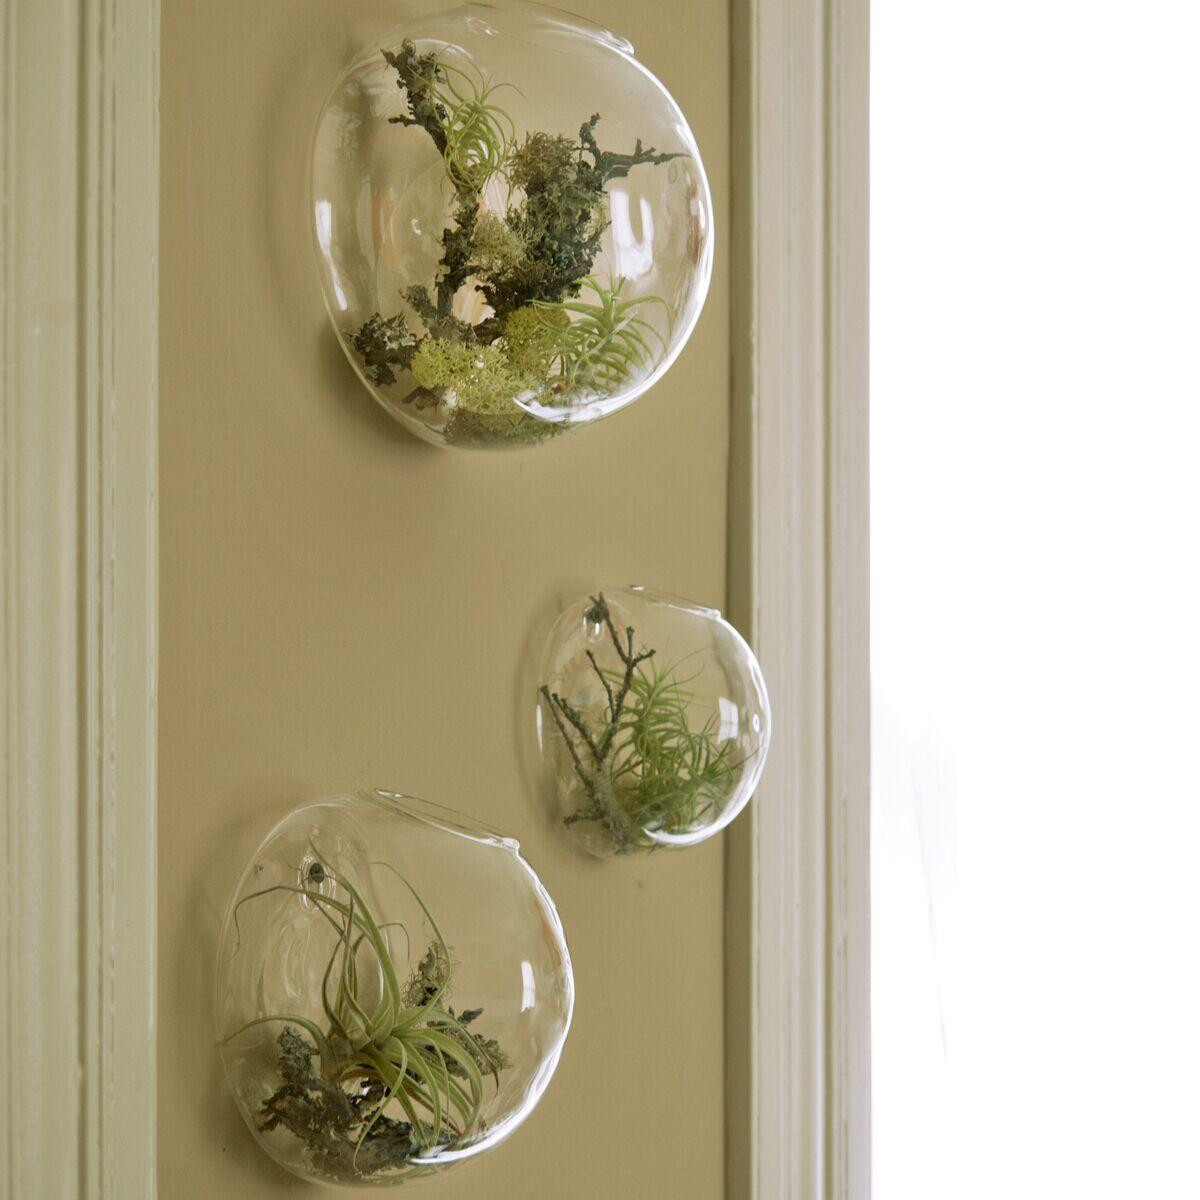 15 Elegant Clear Round Glass Vases wholesale 2023 free download clear round glass vases wholesale of wall bubble terrariums glass wall vase for flowers indoor plants within wall bubble terrariums glass wall vase for flowers indoor plants wall mounted pla